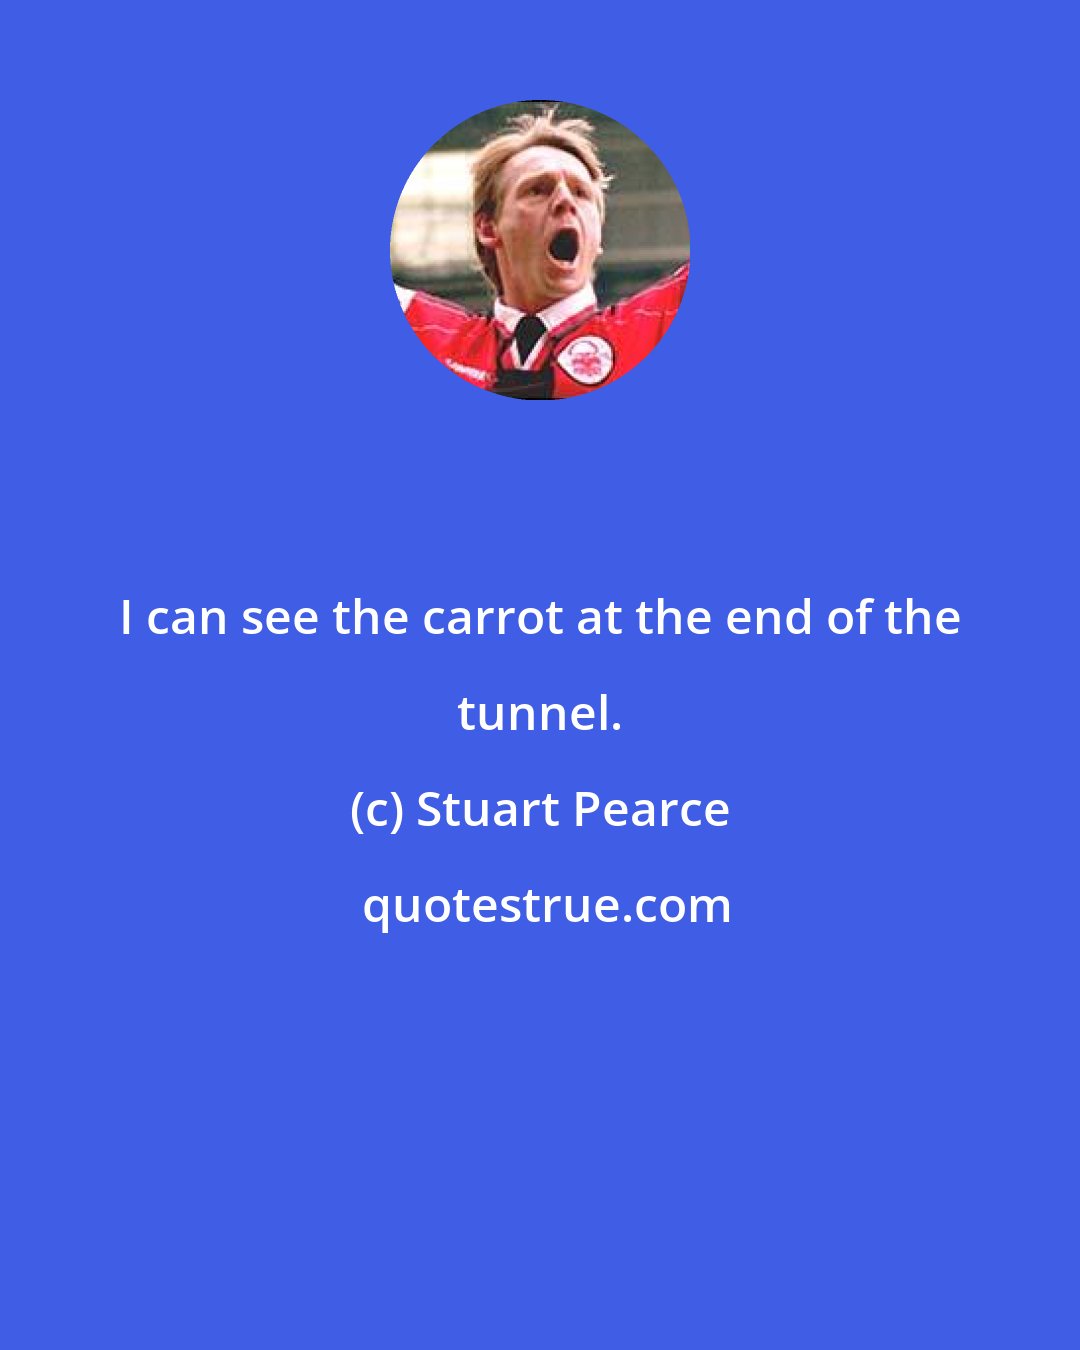 Stuart Pearce: I can see the carrot at the end of the tunnel.